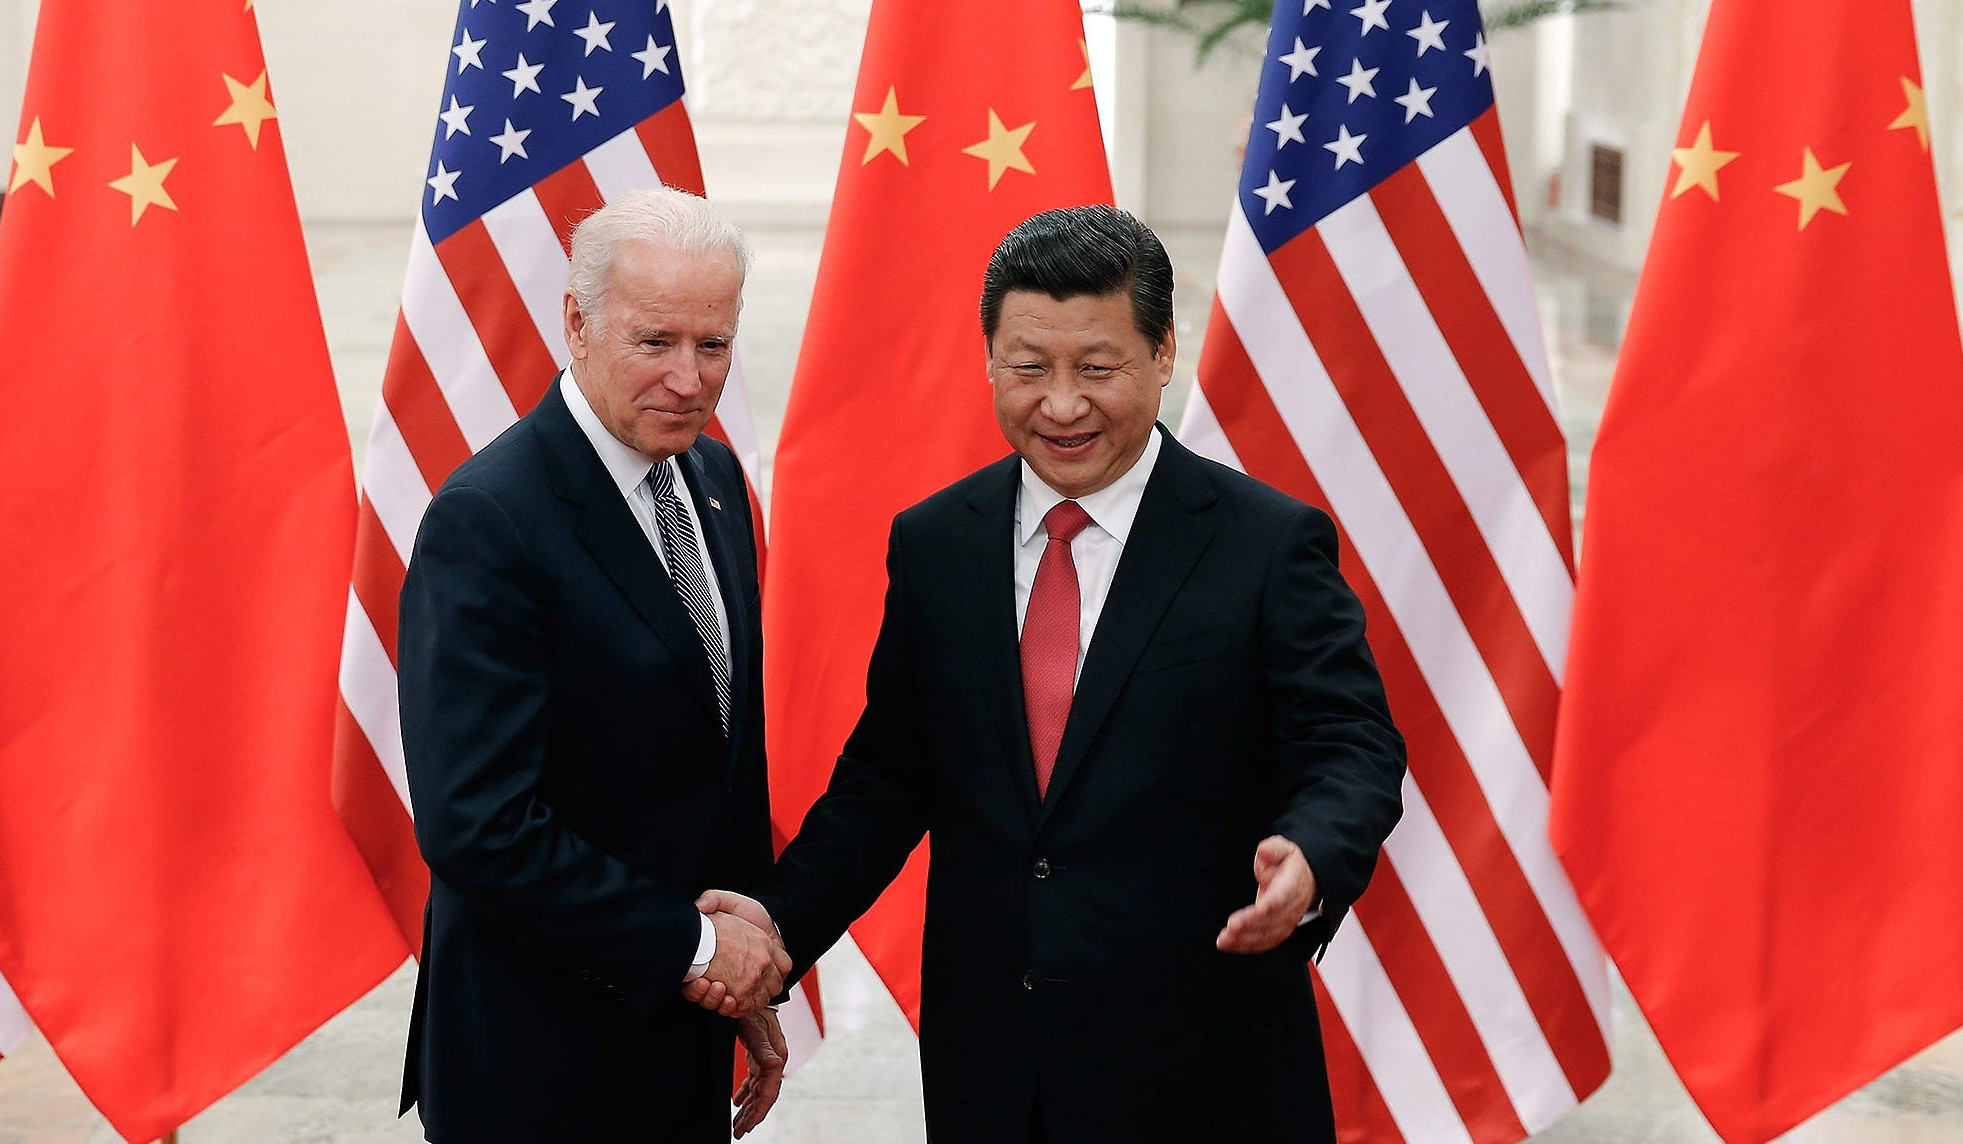 Xi is expected to invite Biden to the Beijing Winter Olympics, sources say